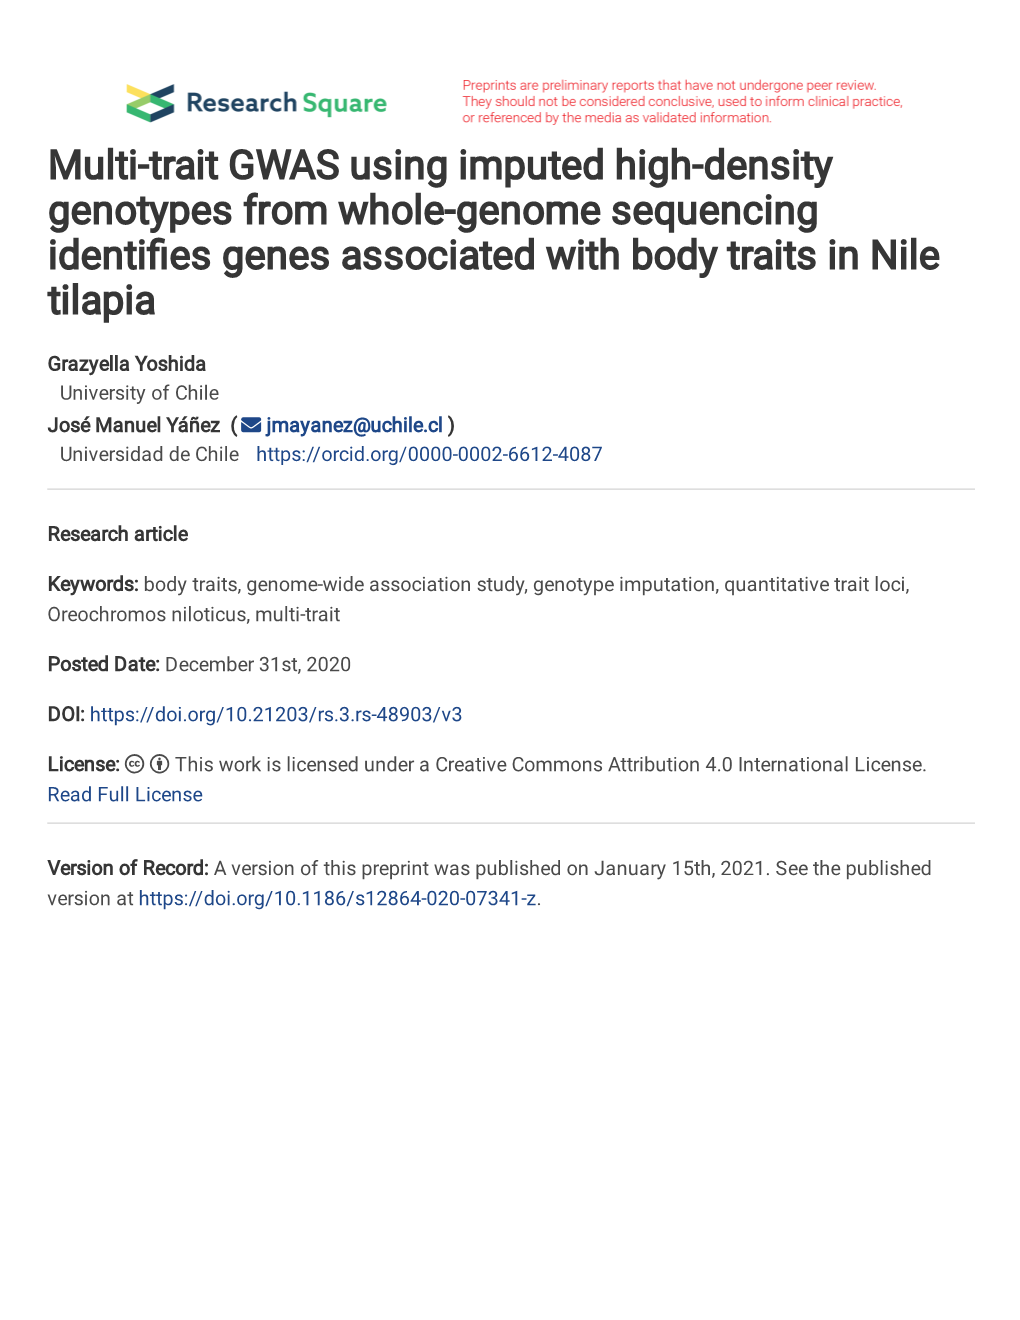 Multi-Trait GWAS Using Imputed High-Density Genotypes from Whole-Genome Sequencing Identi�Es Genes Associated with Body Traits in Nile Tilapia